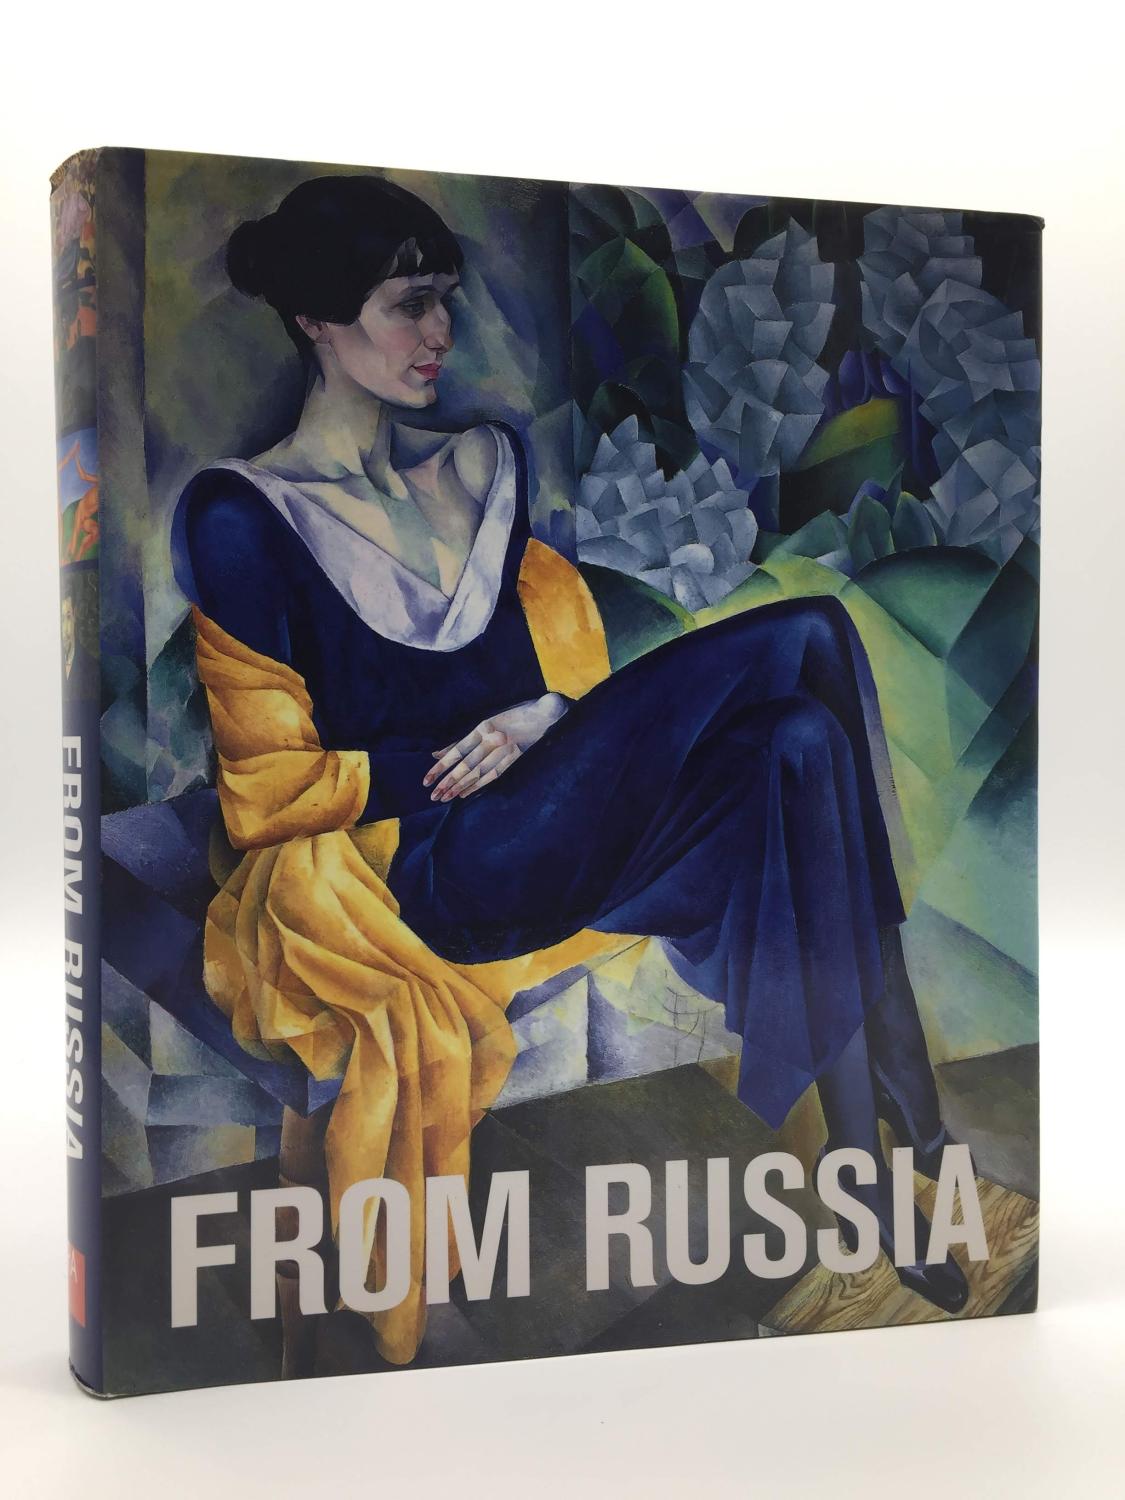 From Russia: French and Russian Master Paintings 1870 - 1925 from Moscow and St Petersburg - Albert Kostenevich; Anna Poznanskaya